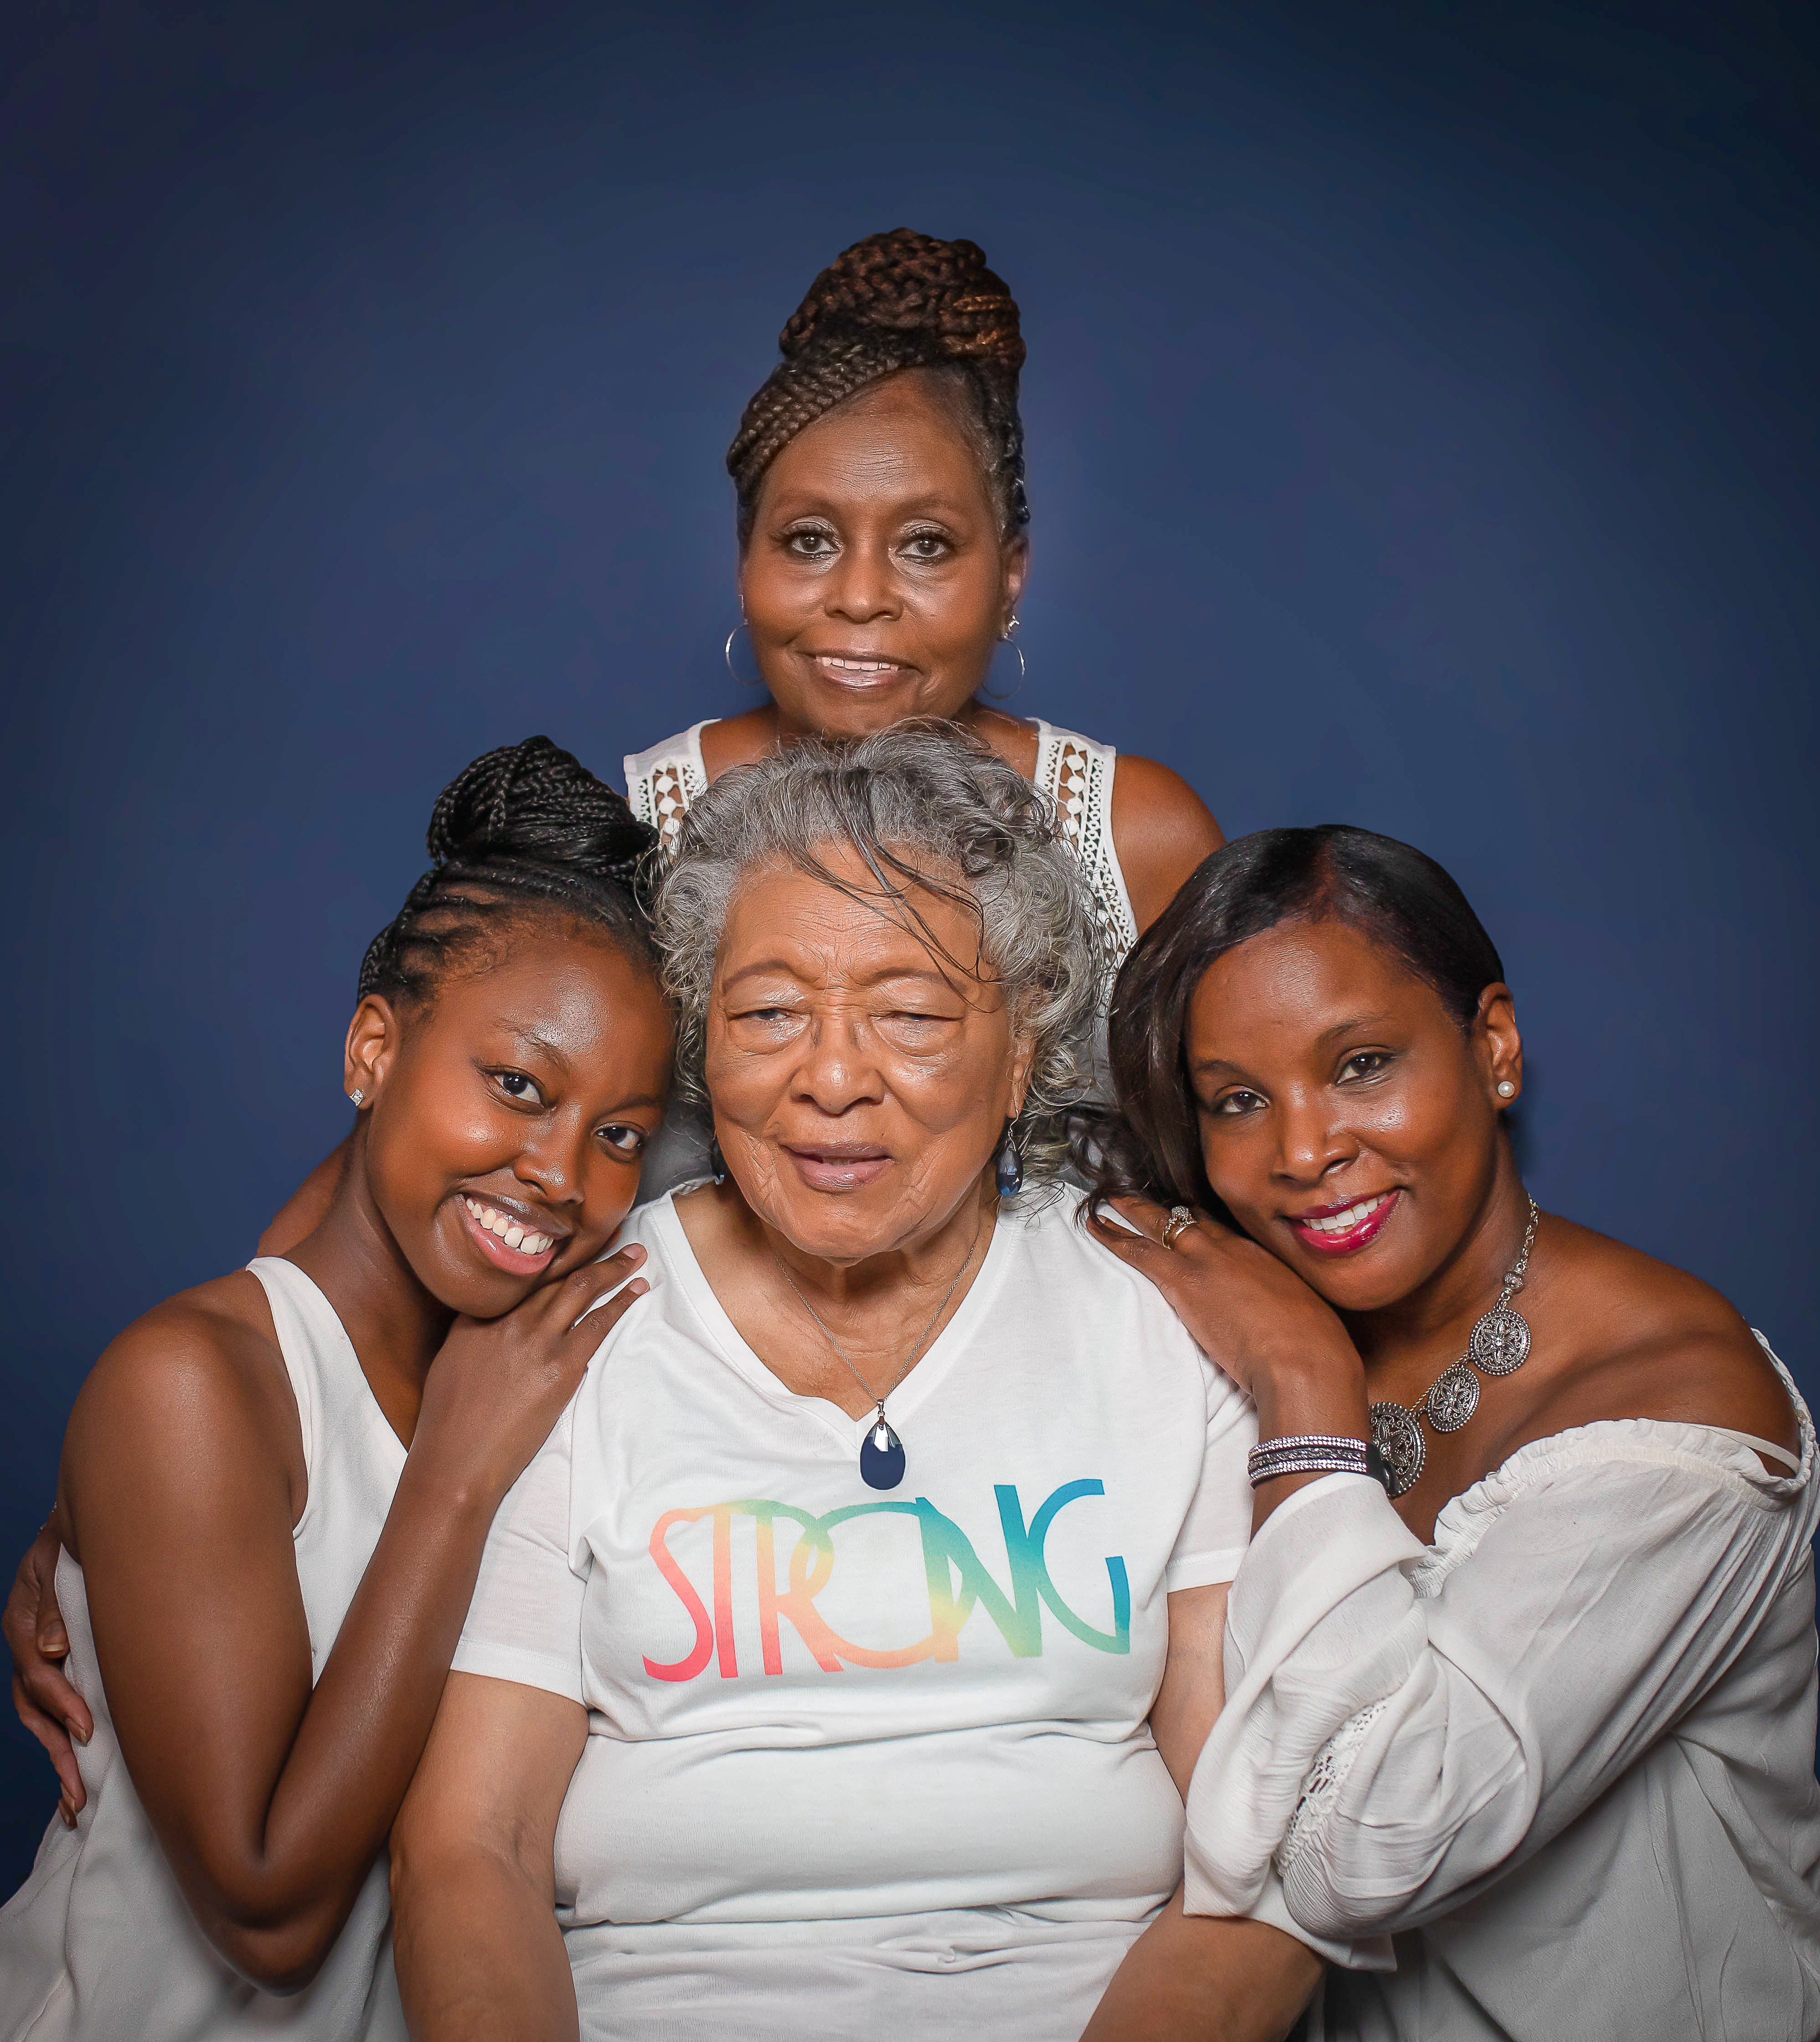 Unusual family includes five generations of women